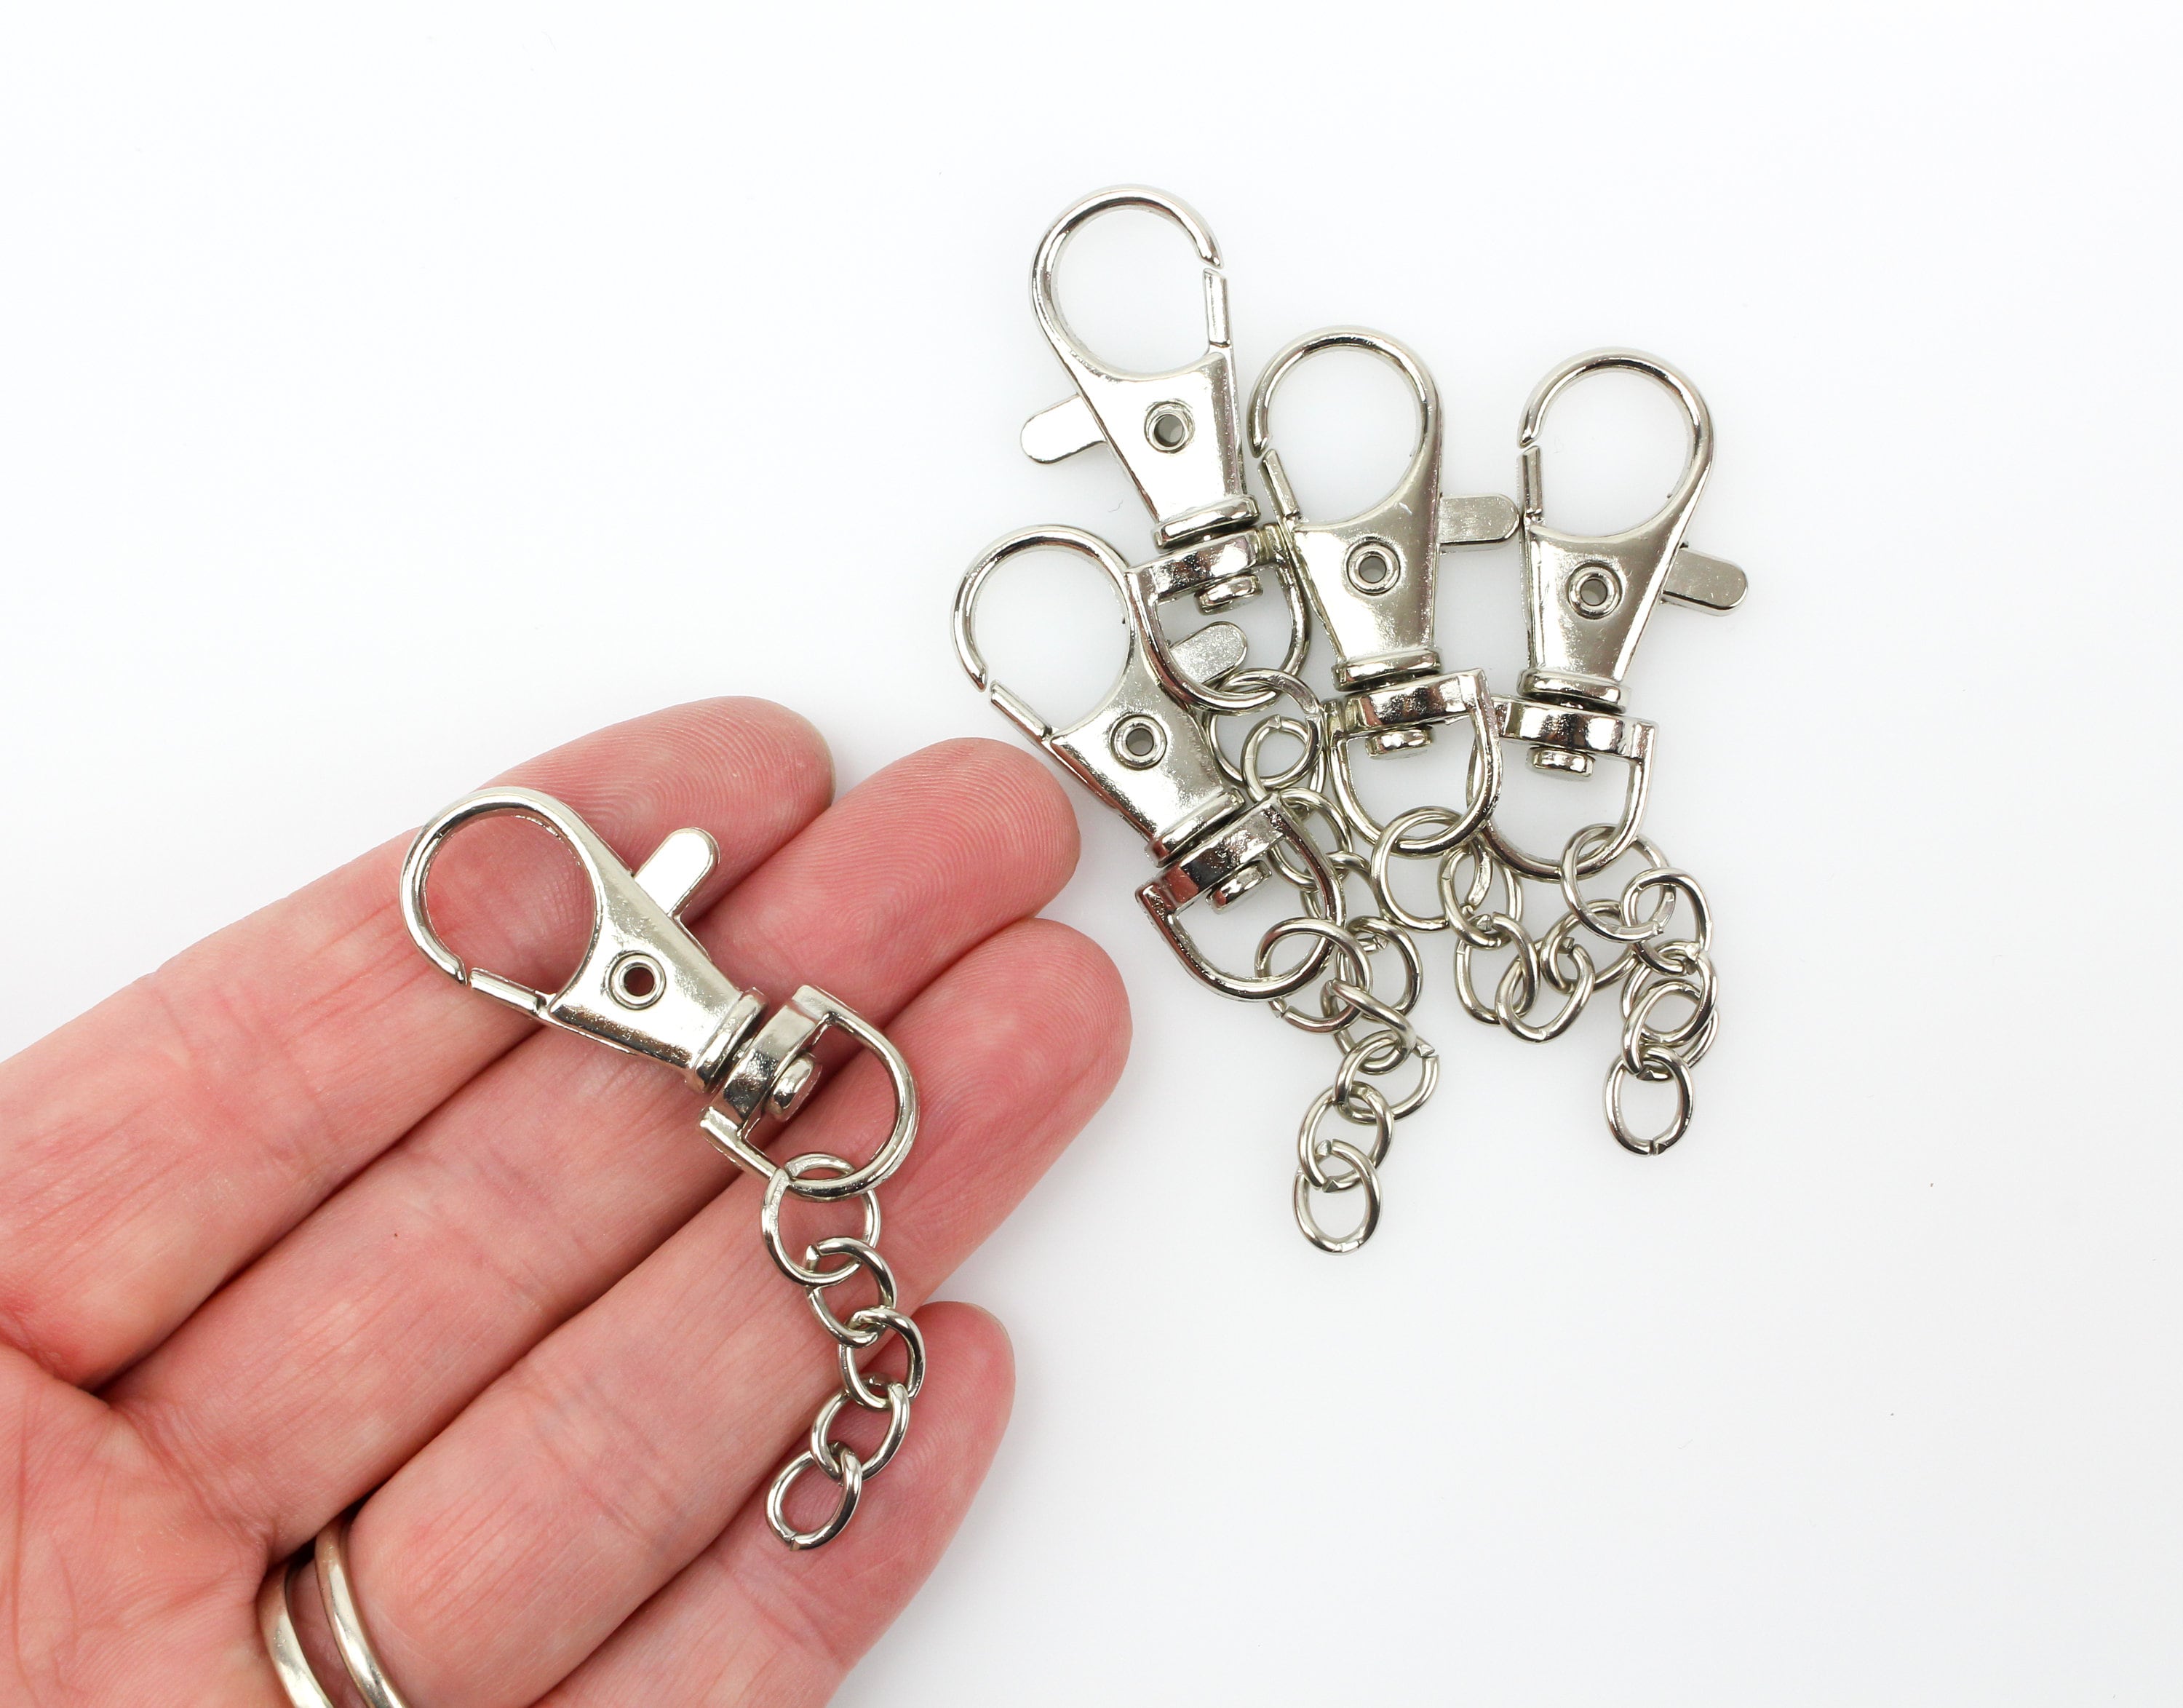 Keychain Hook, 10Pcs Swivel Keychain Clasp 360° Rotation Fine Workmanship  Rotating Hook Clamp Keychain Clip for Home (Light Gold)